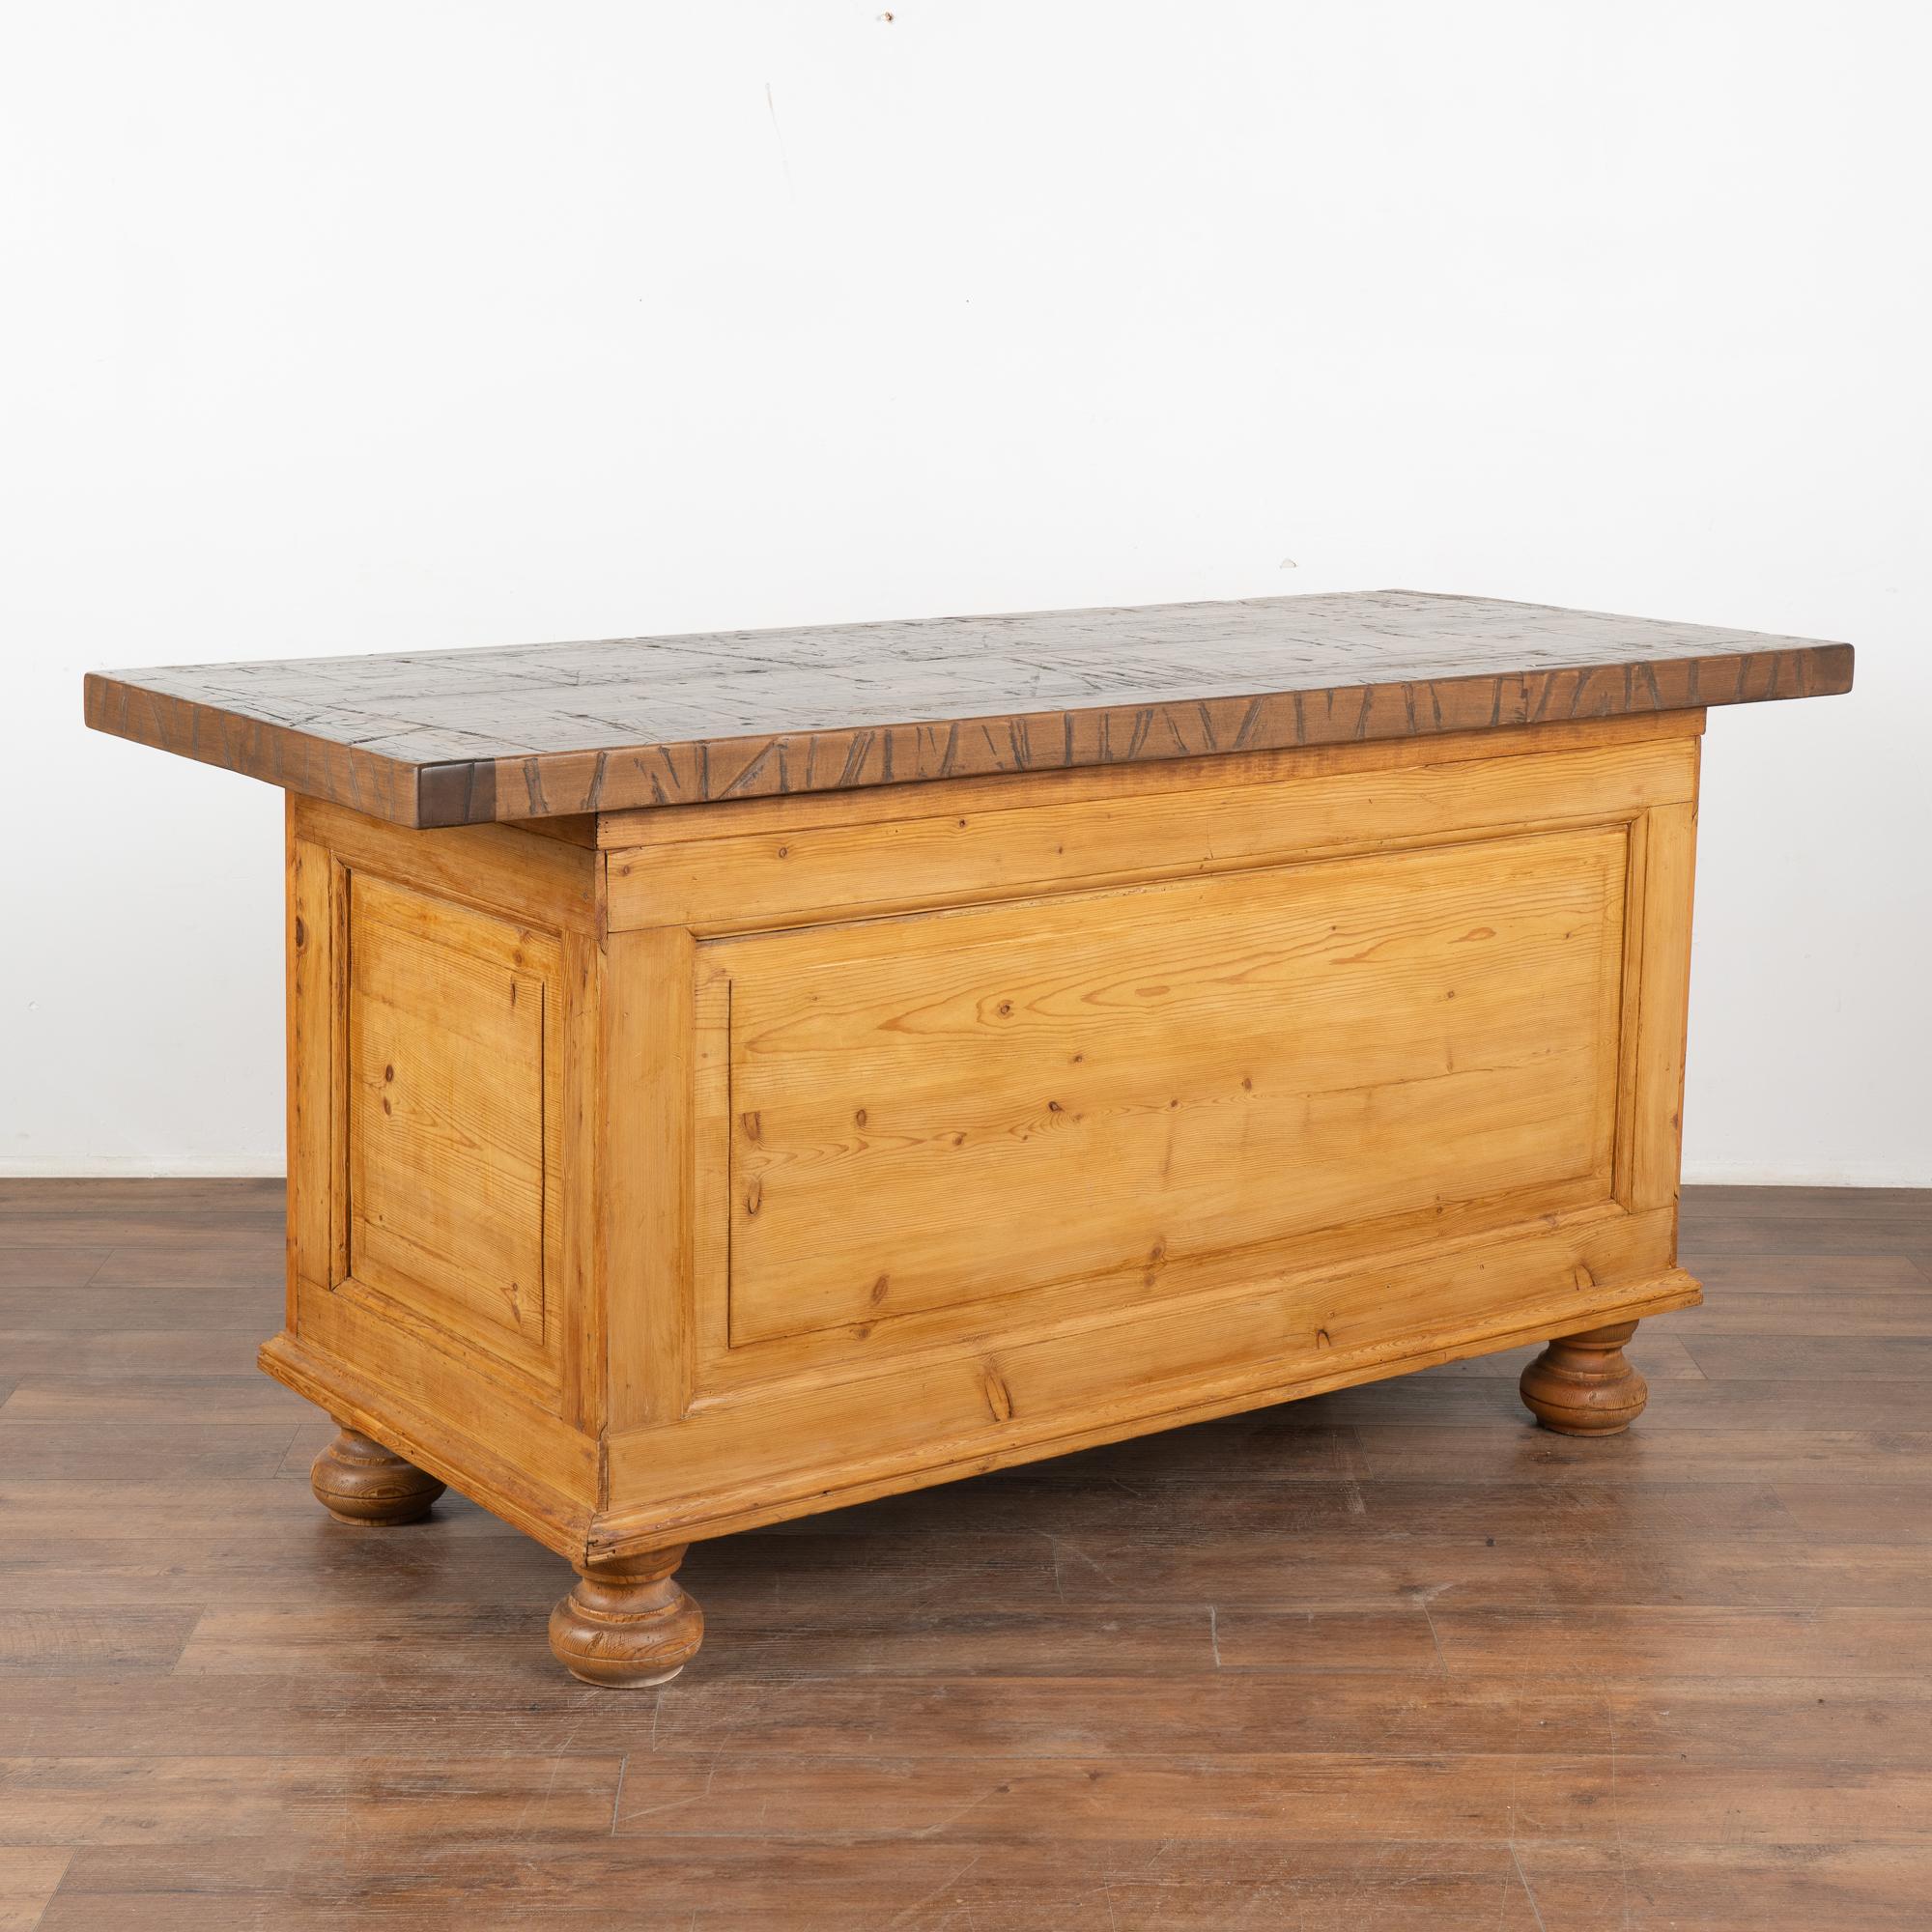 Free Standing Pine Kitchen Island Shop Counter Apothecary, Denmark circa 1880's For Sale 2